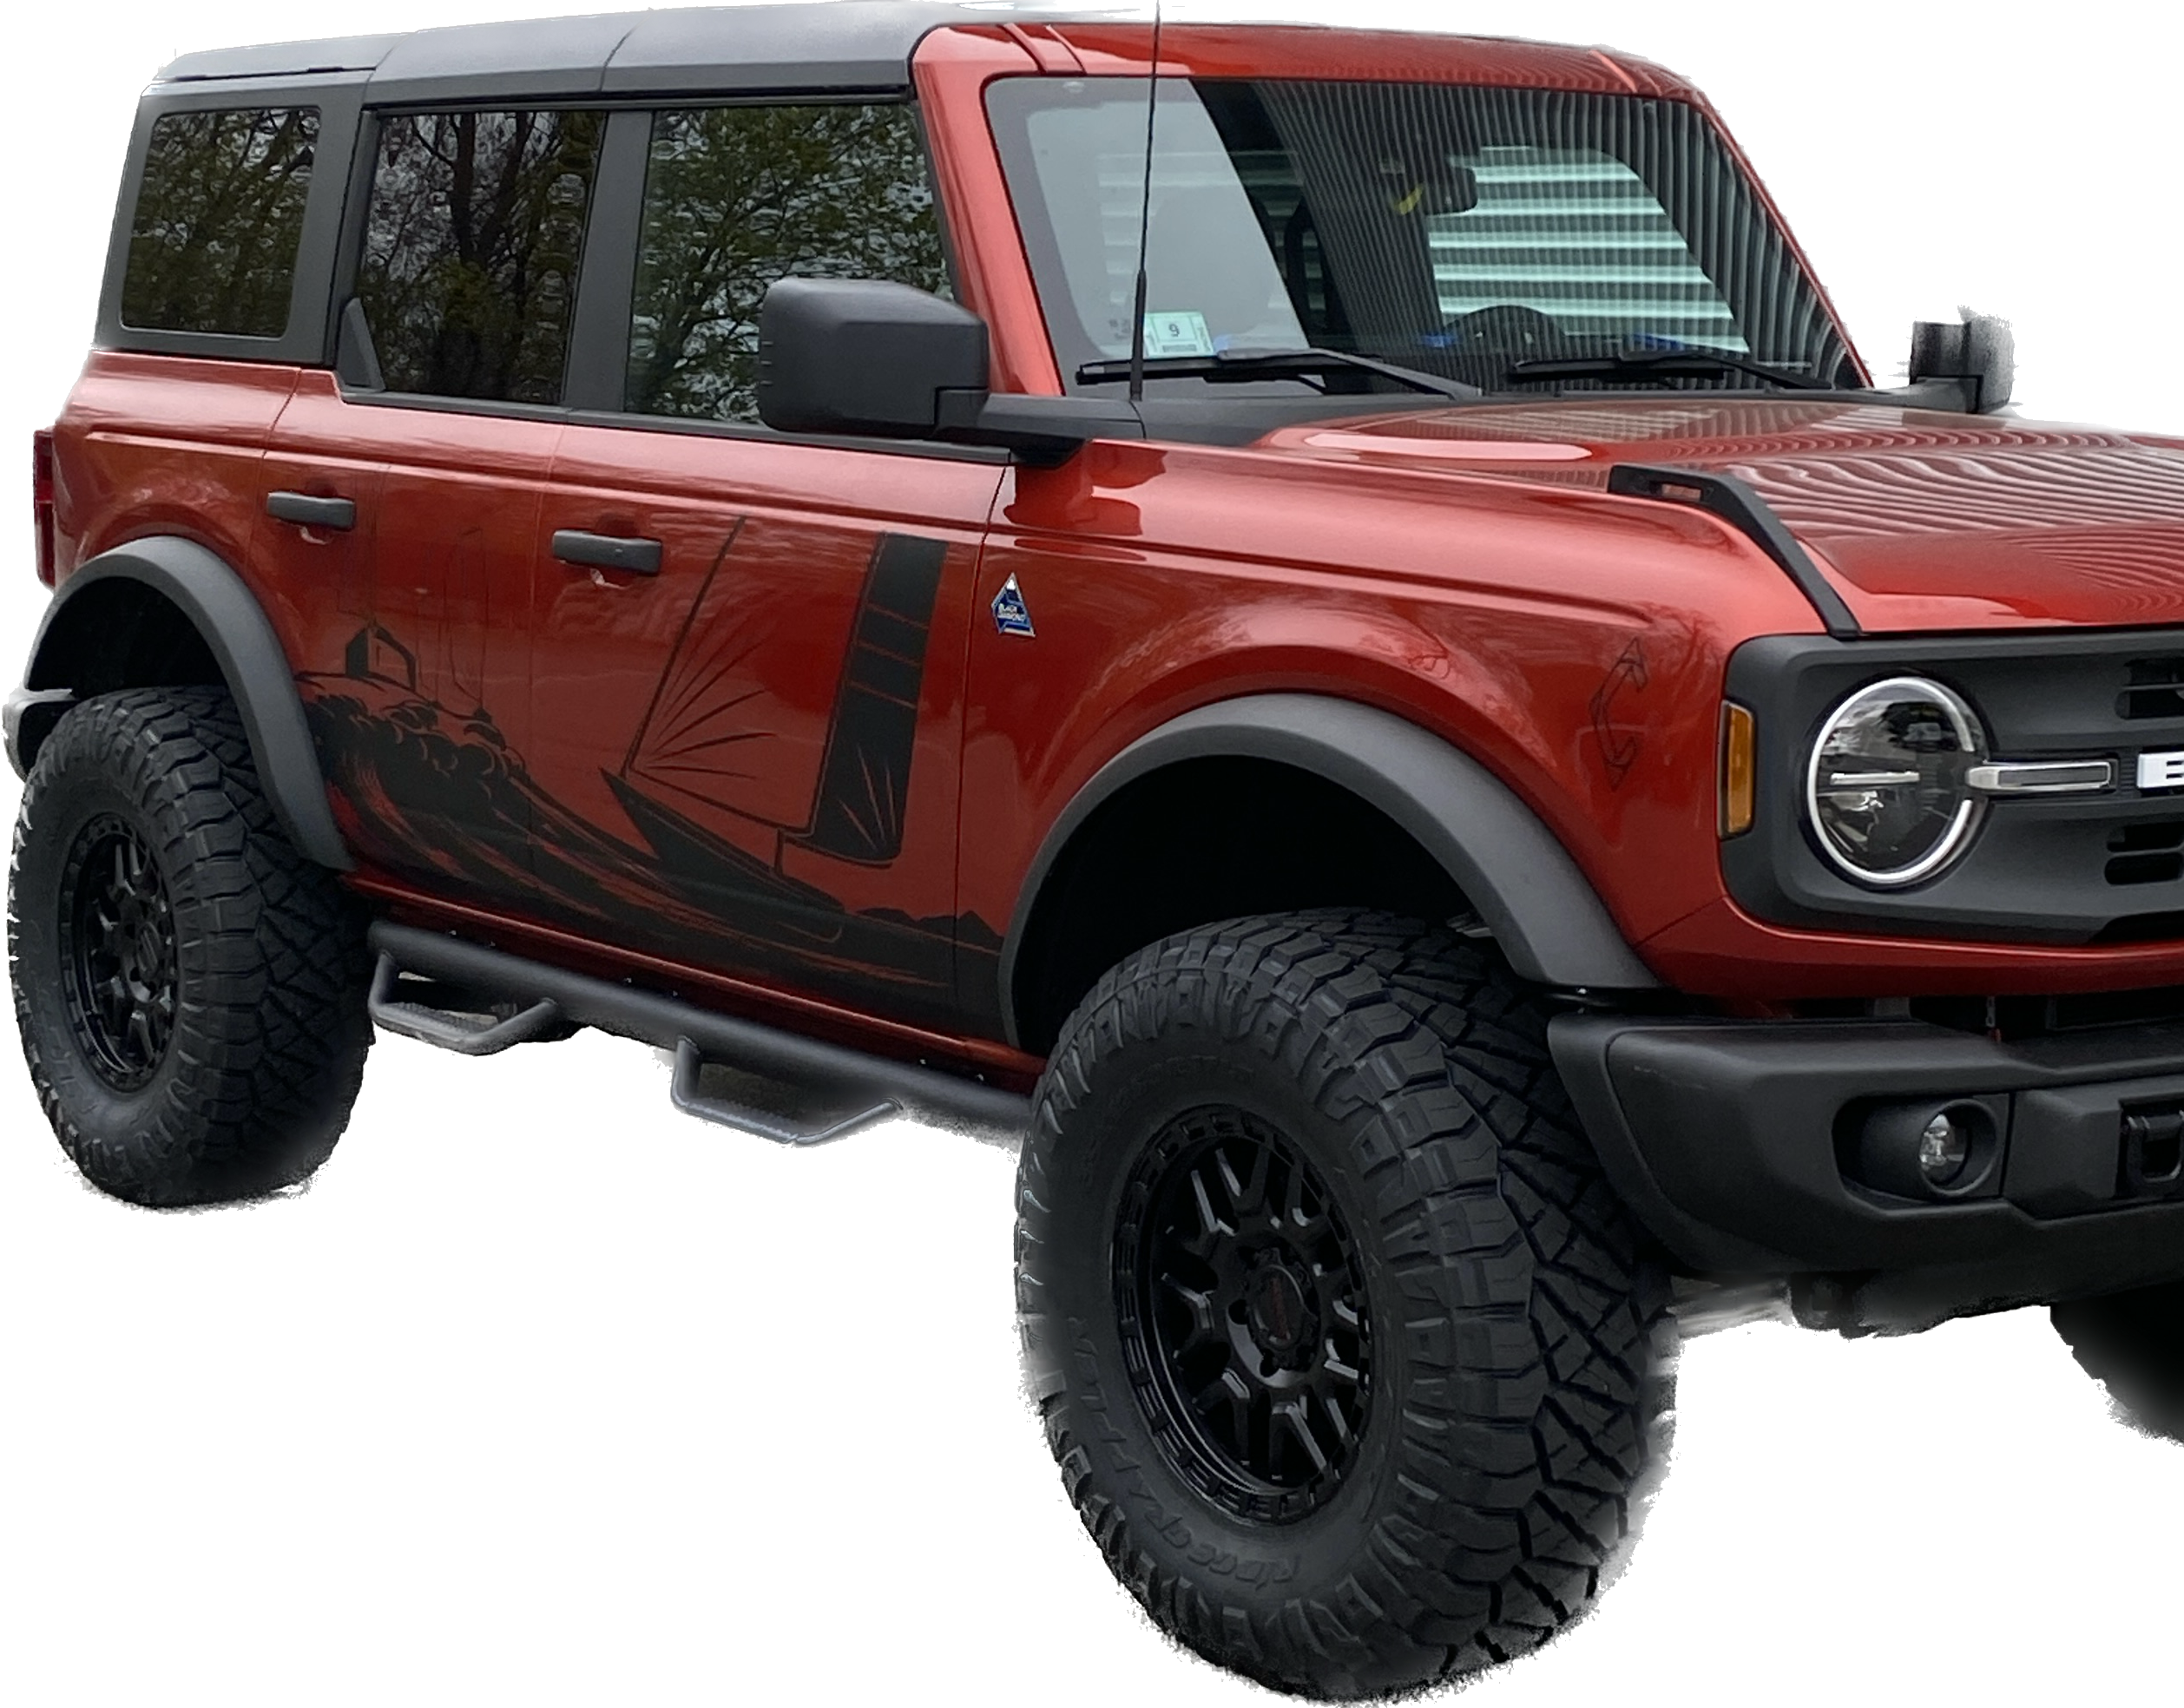 Ford Bronco Then & Now: show your assembly line Bronco and current Bronco picture Bronco Mods